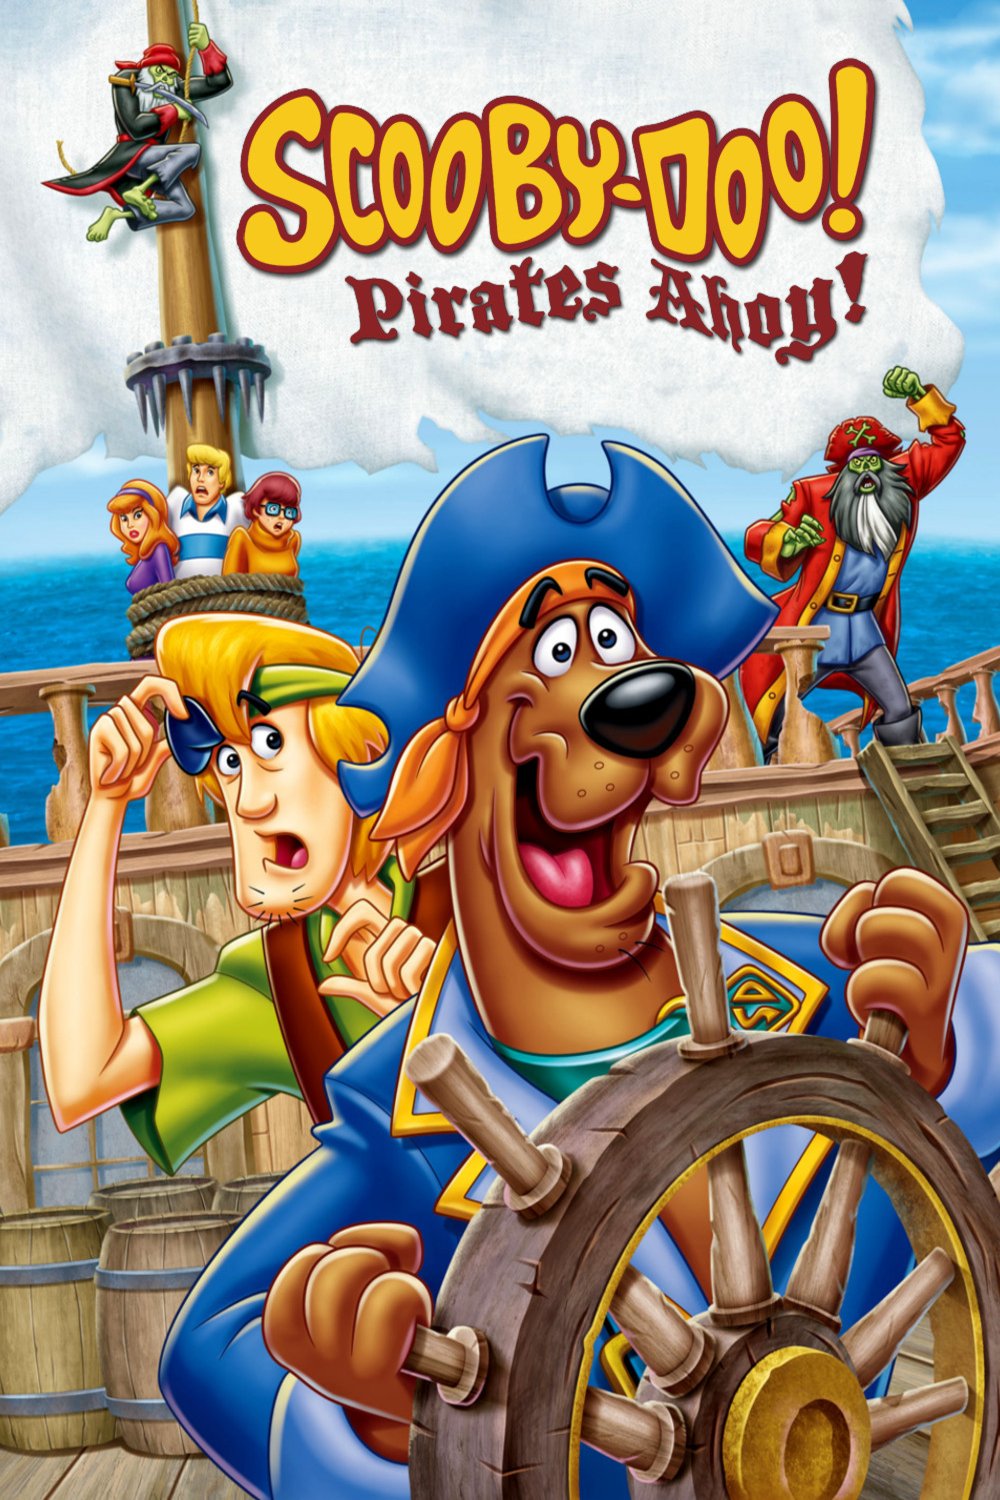 Poster of the movie Scooby-Doo! Pirates Ahoy!